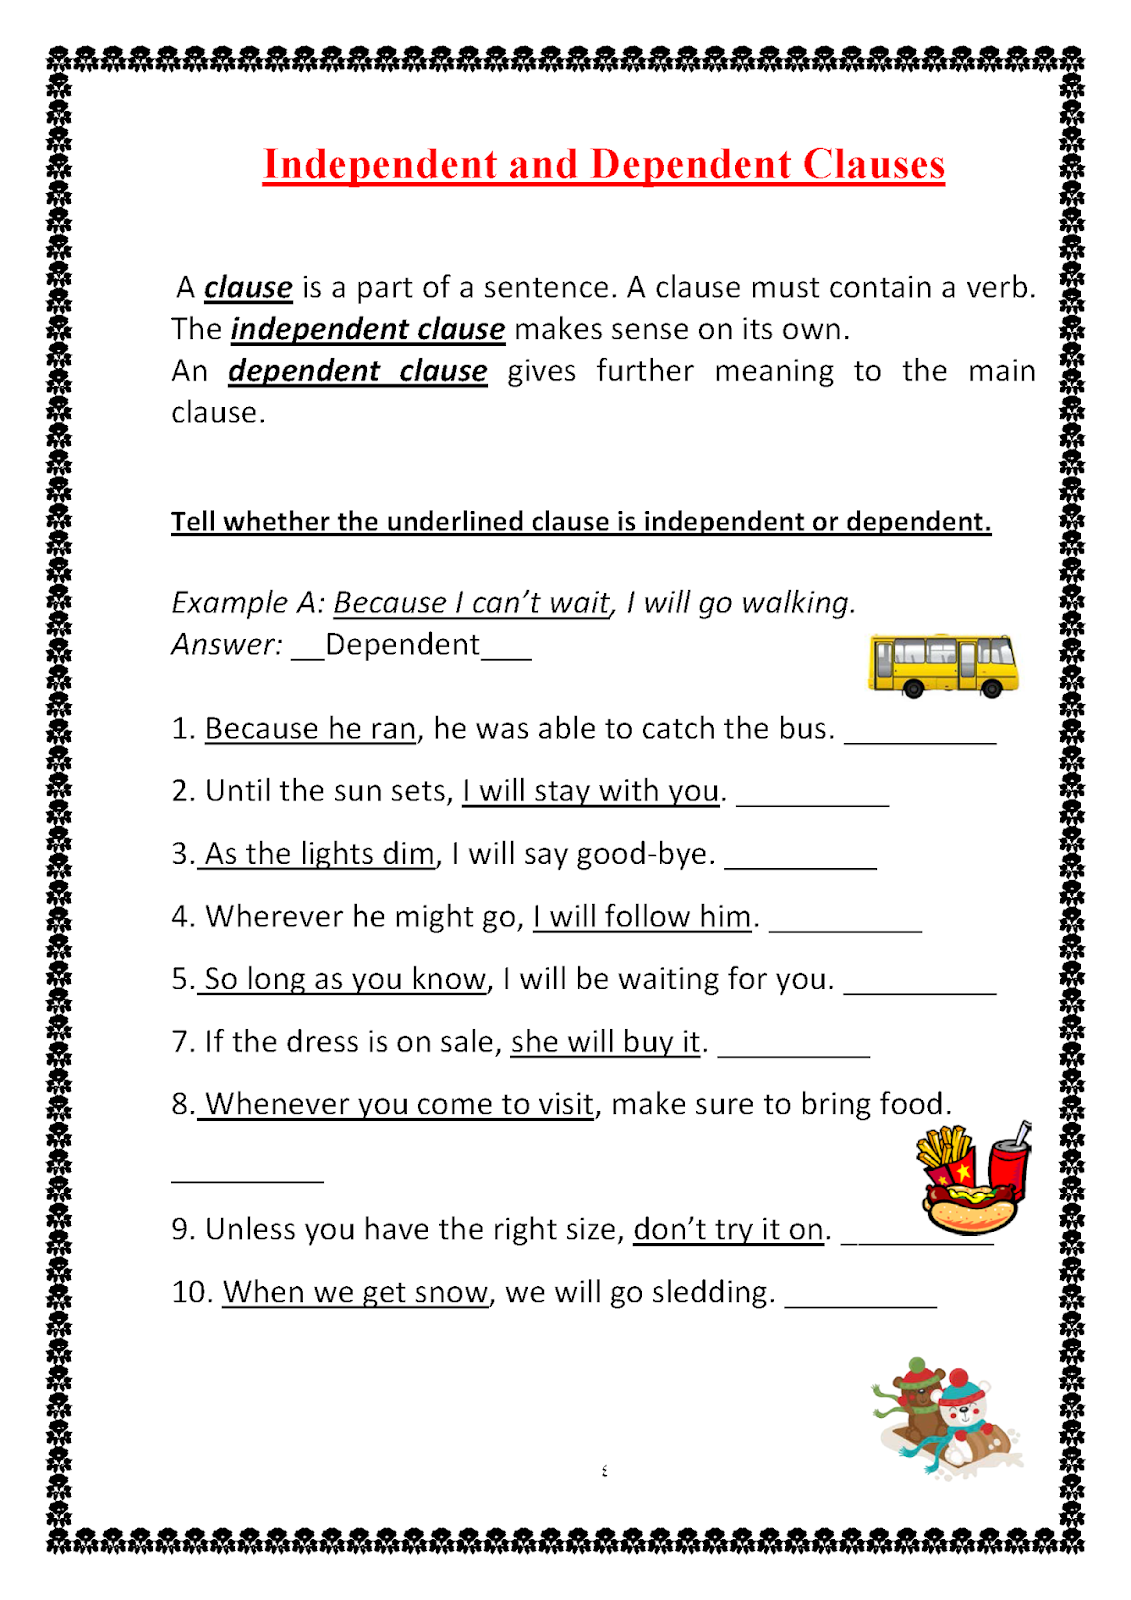 independent-and-dependent-subordinate-clauses-worksheet